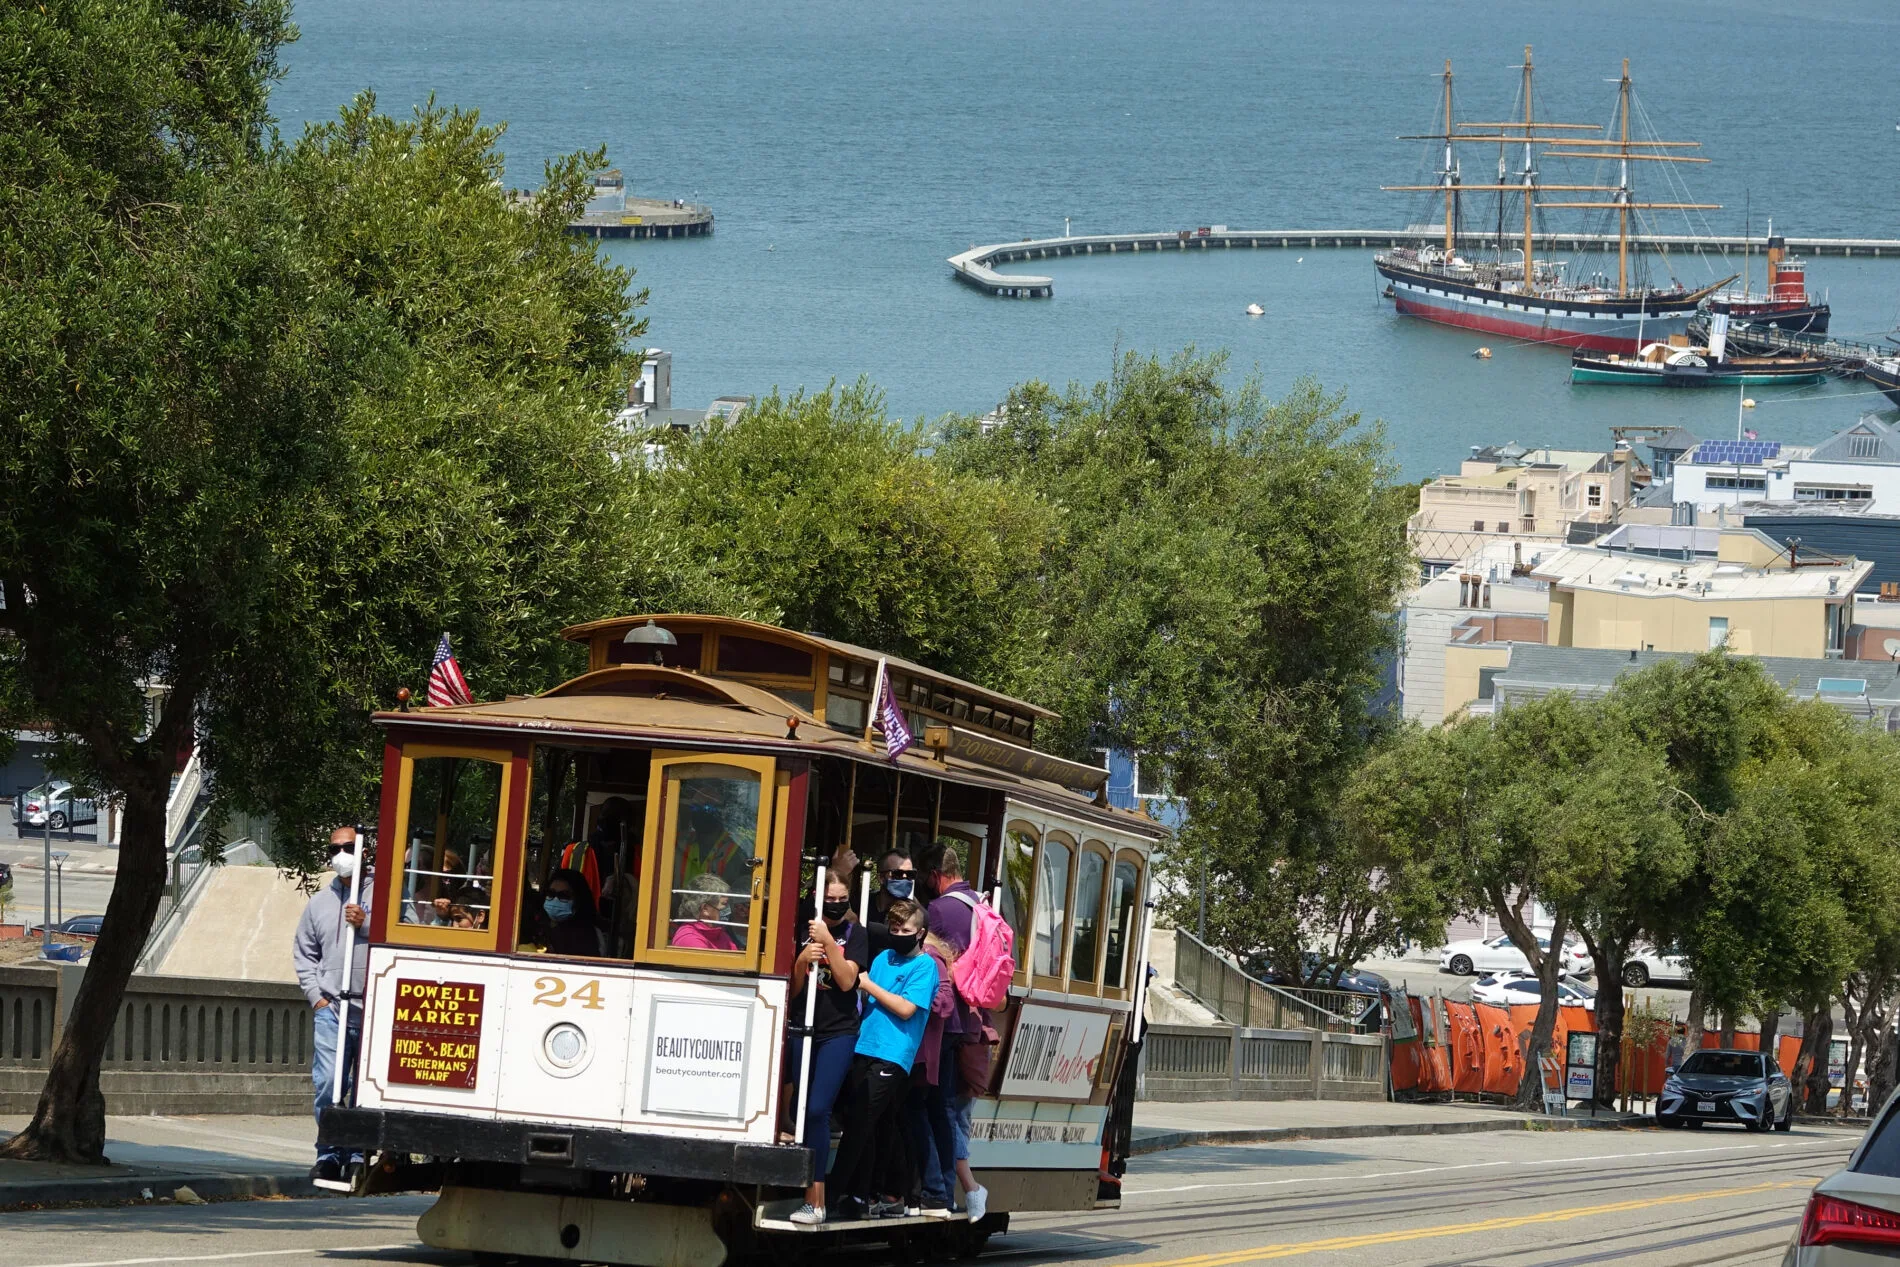 Riding a cable car to Fisherman's Wharf. It’s a must-do attraction in San Francisco.